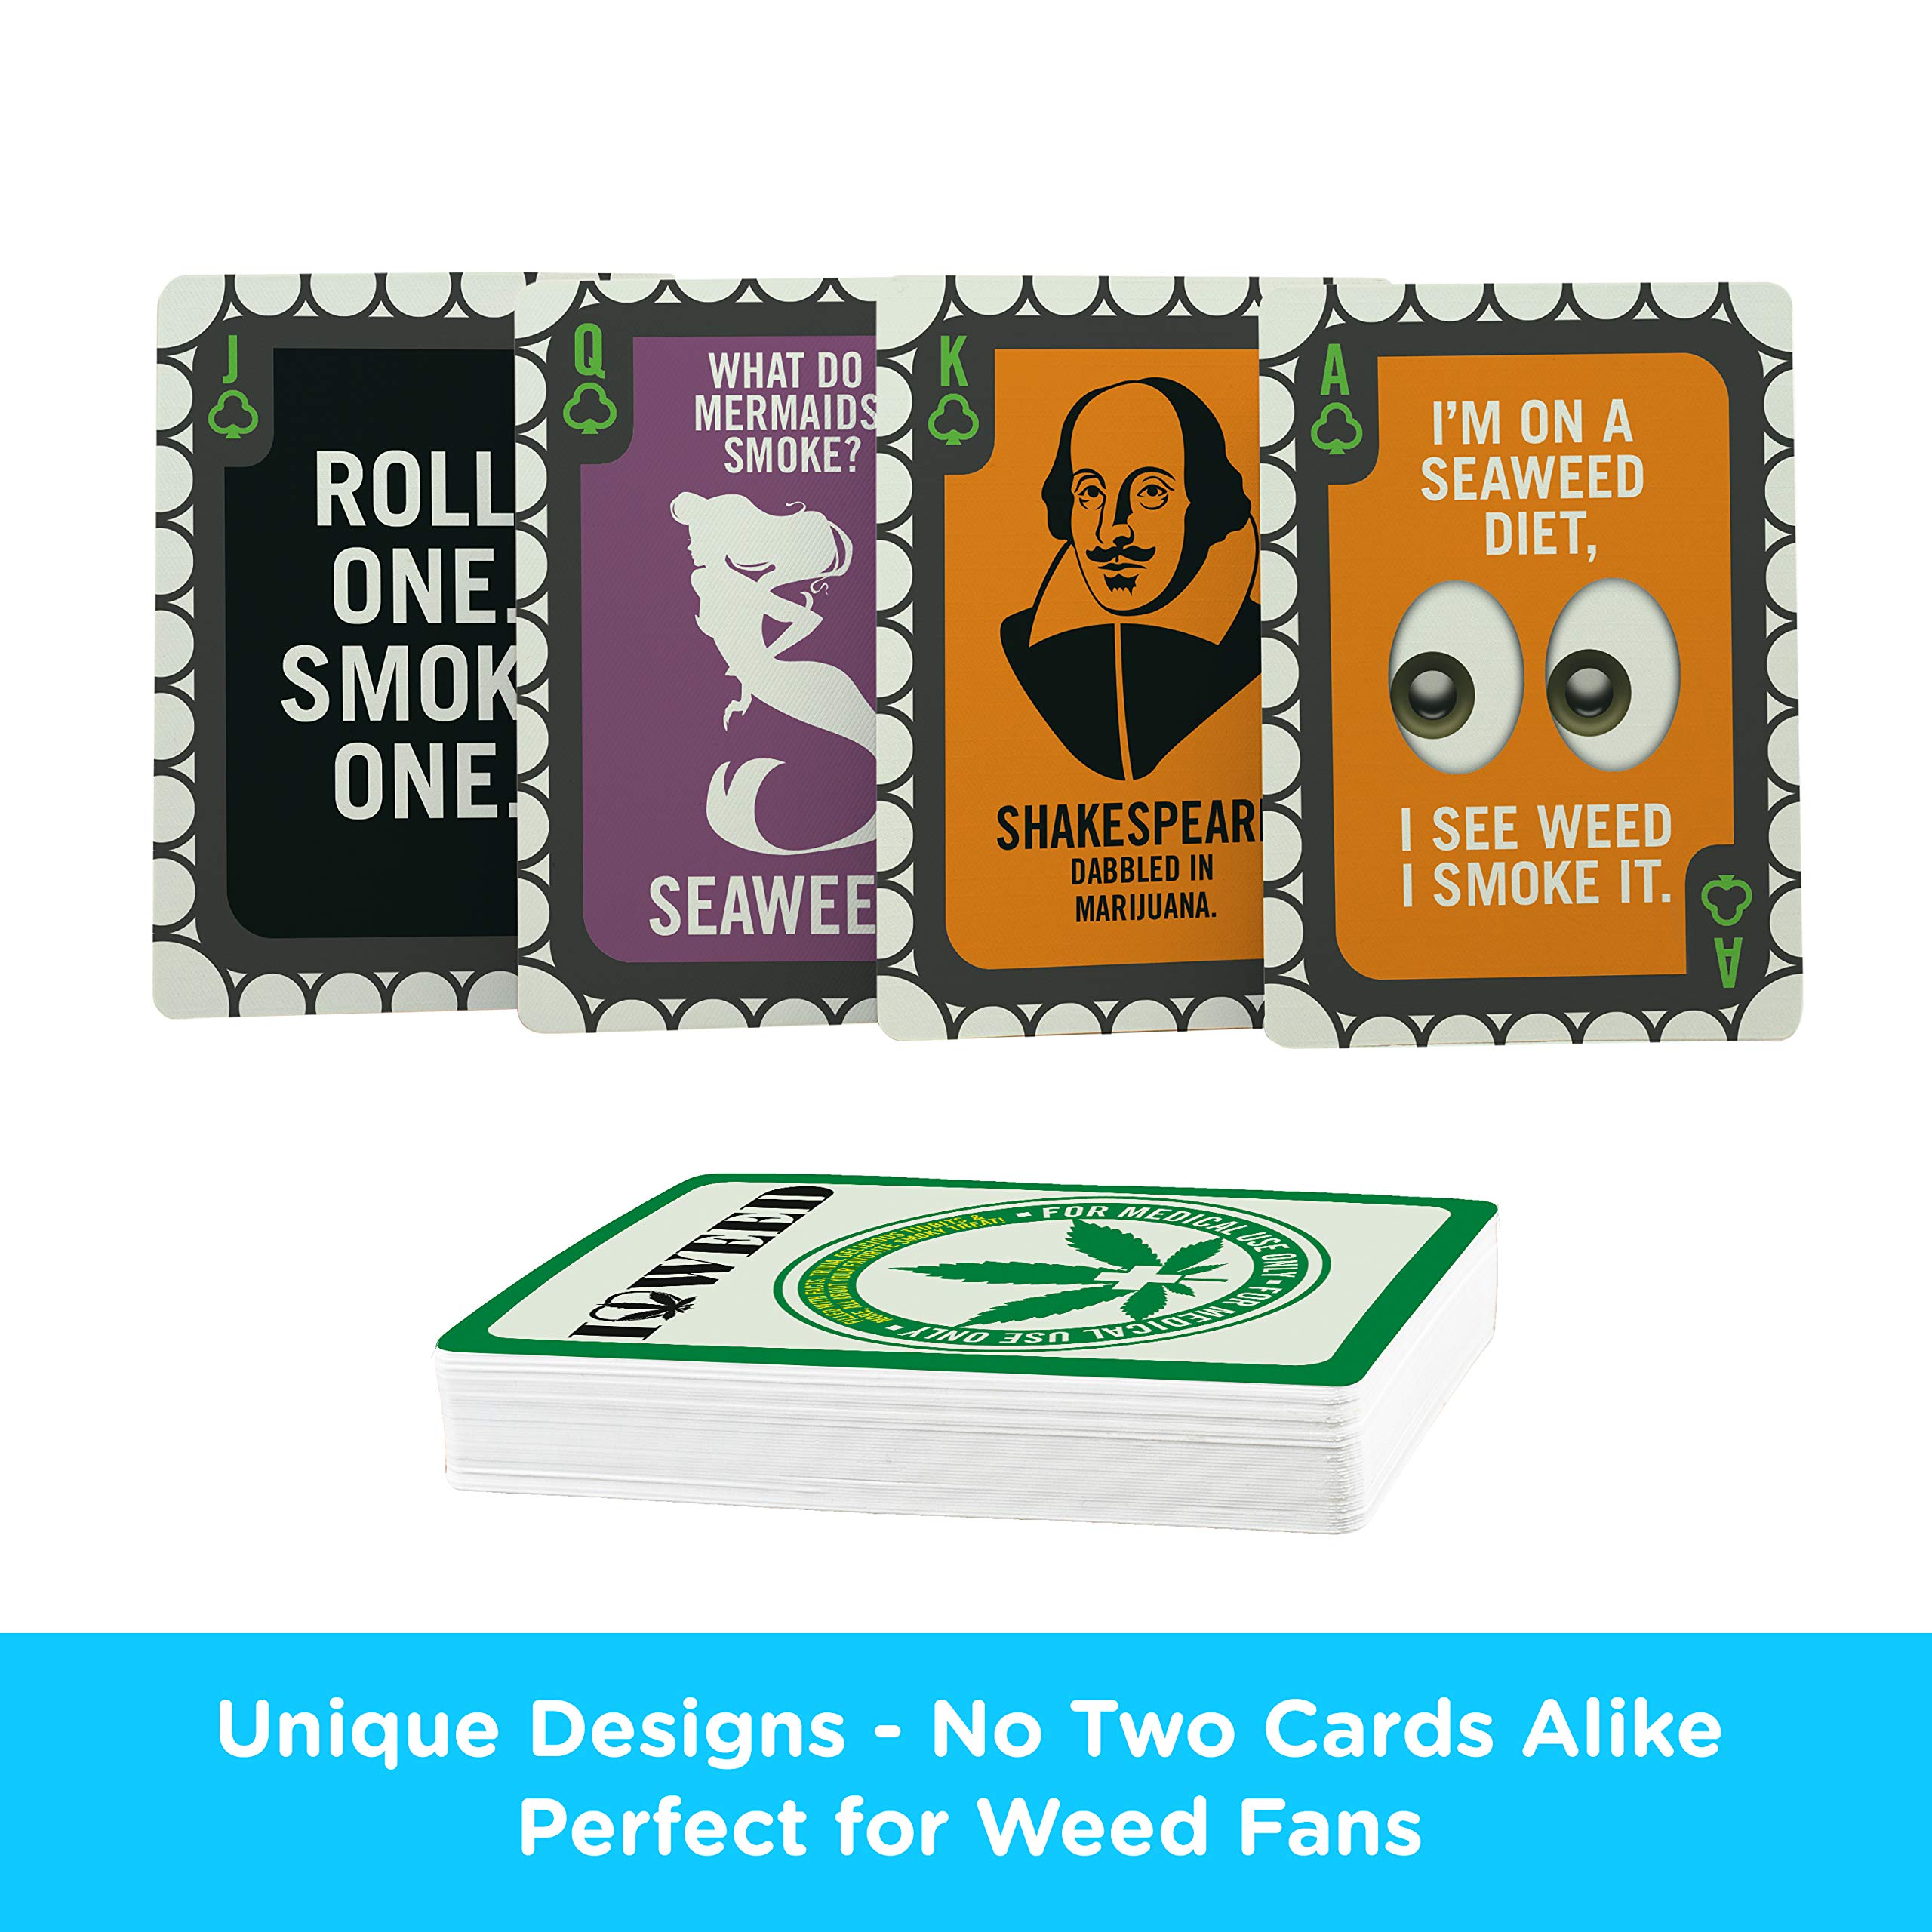 AQUARIUS Weed Playing Cards - Weed Themed Deck of Cards for Your Favorite Card Games - Weed Merchandise & Collectibles - Poker Size with Linen Finish